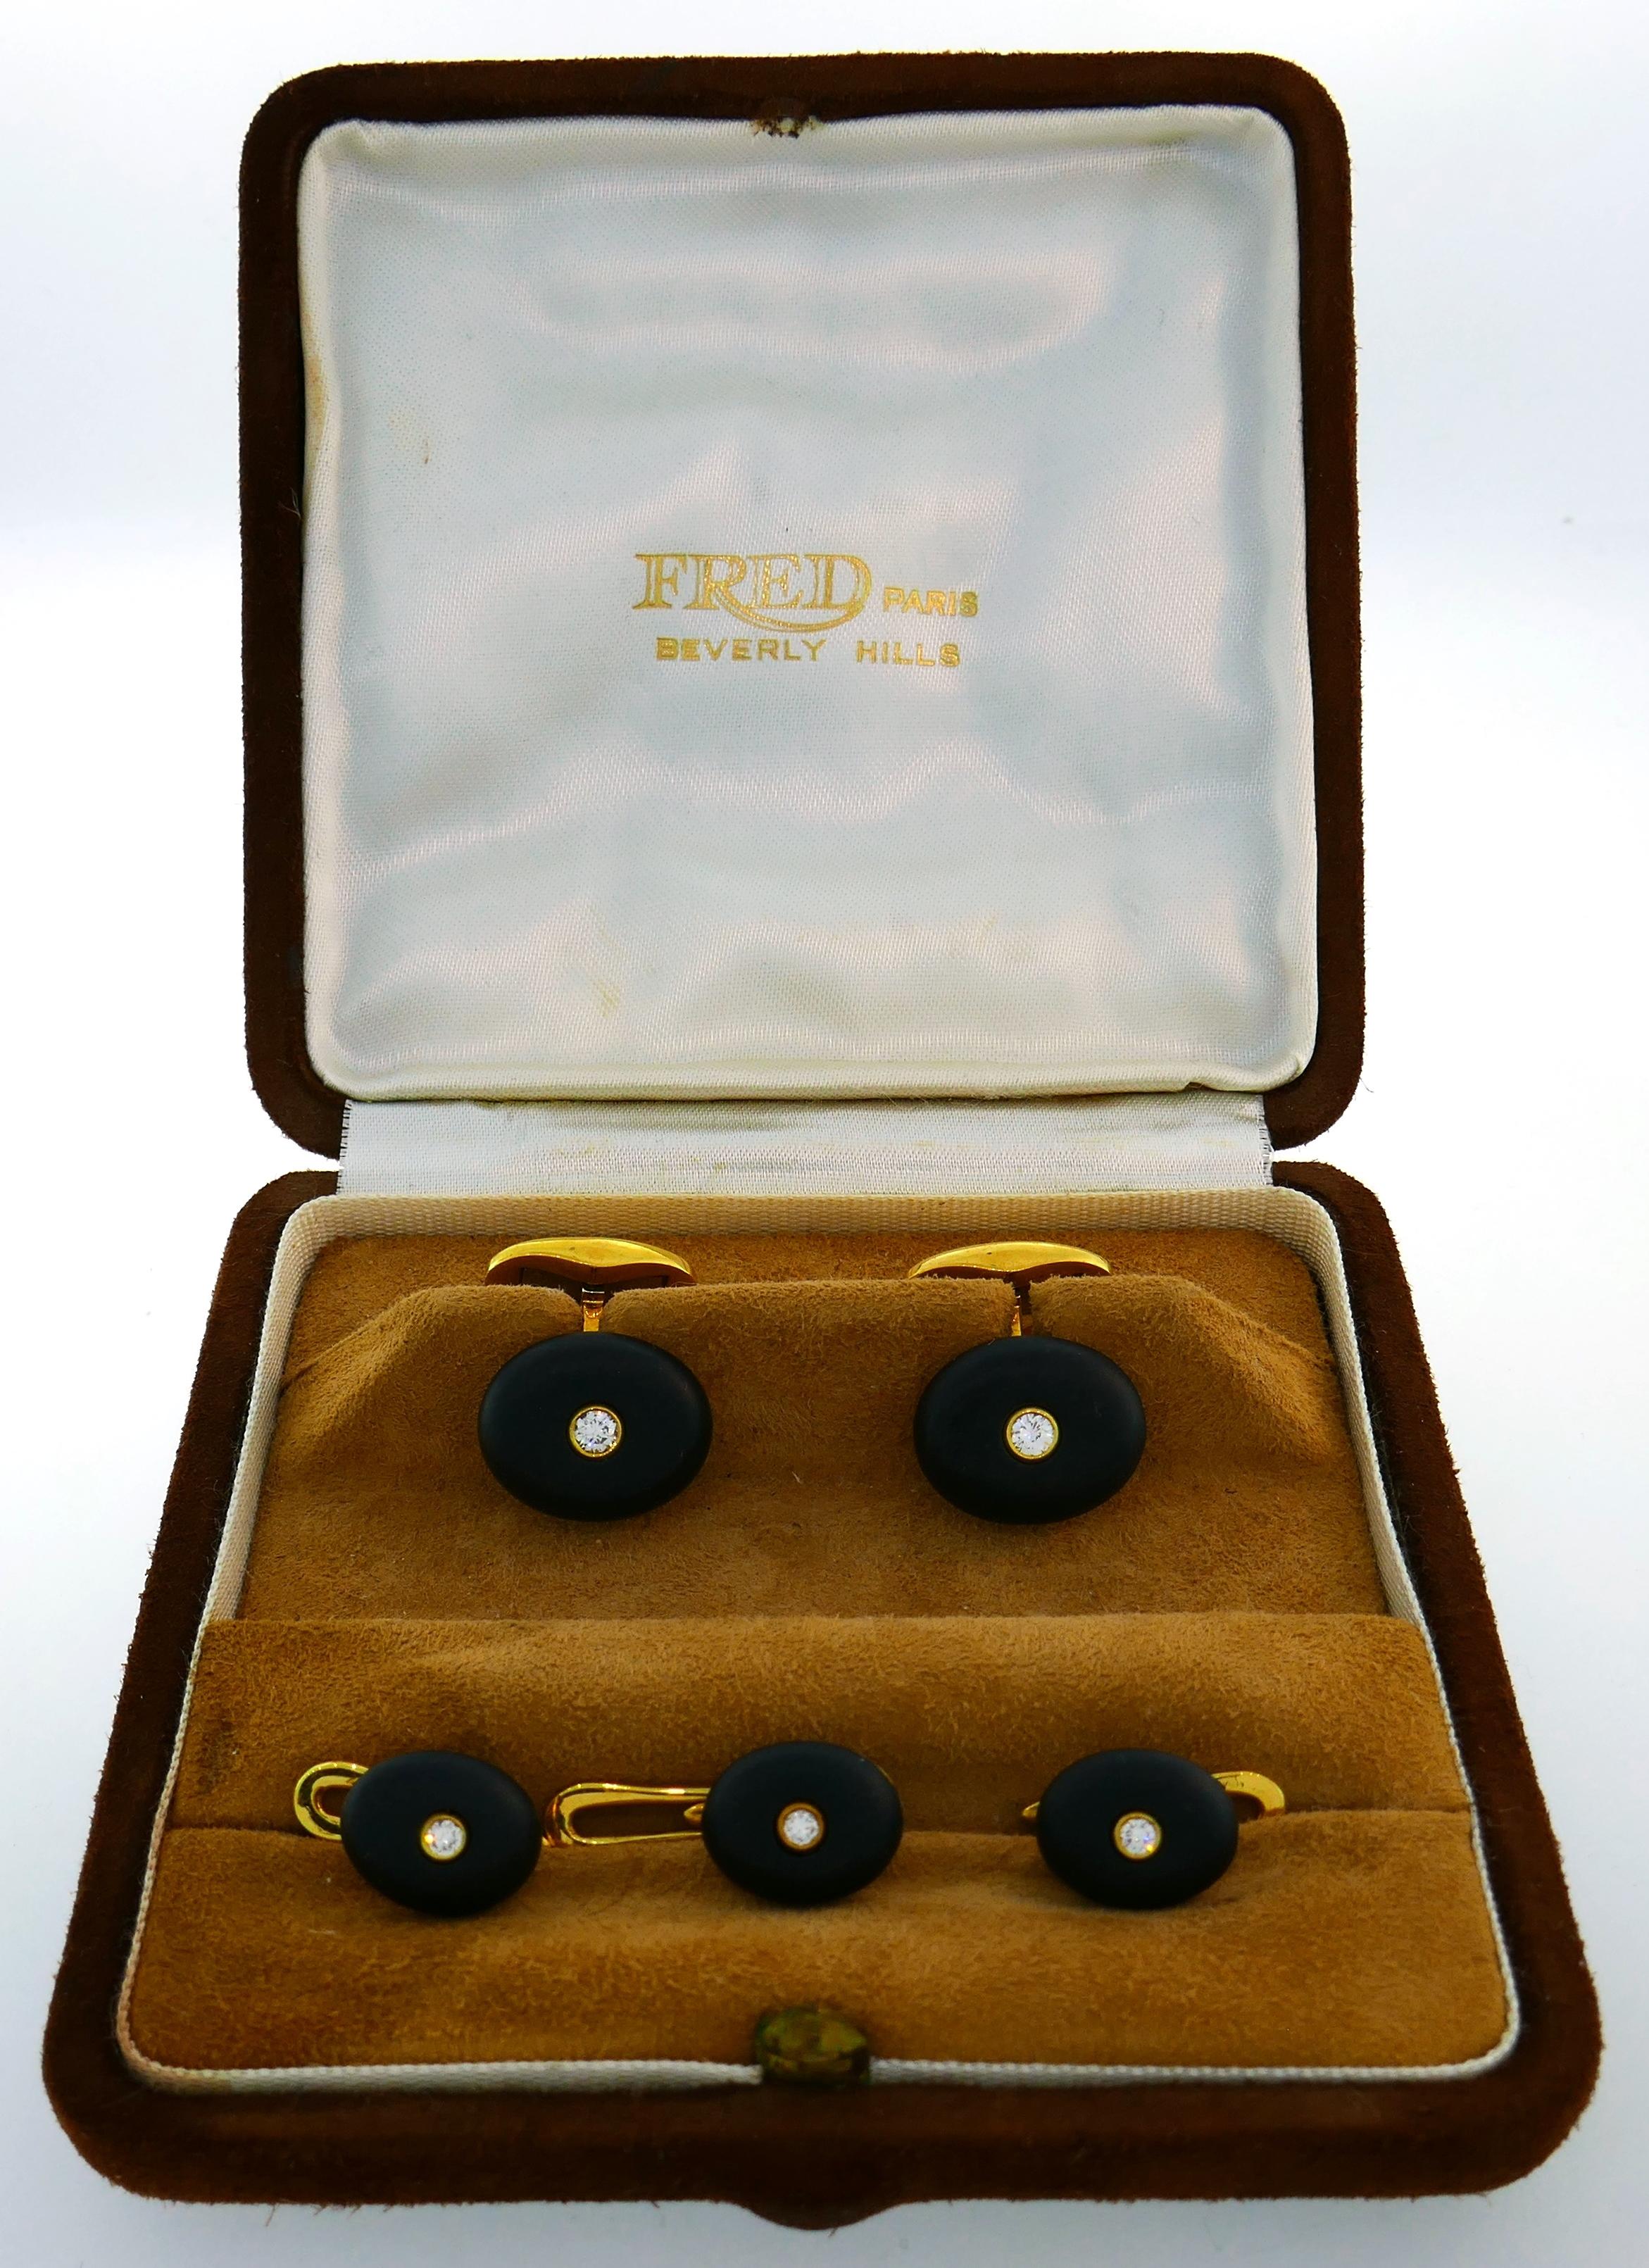 Classy cufflink & stud set created by Fred in West Germany in the 1980's. Elegant and stylish, the set is a great addition to your jewelry and accessories collection. 
Made of 18 karat (stamped) yellow gold, black jet and accented with diamonds